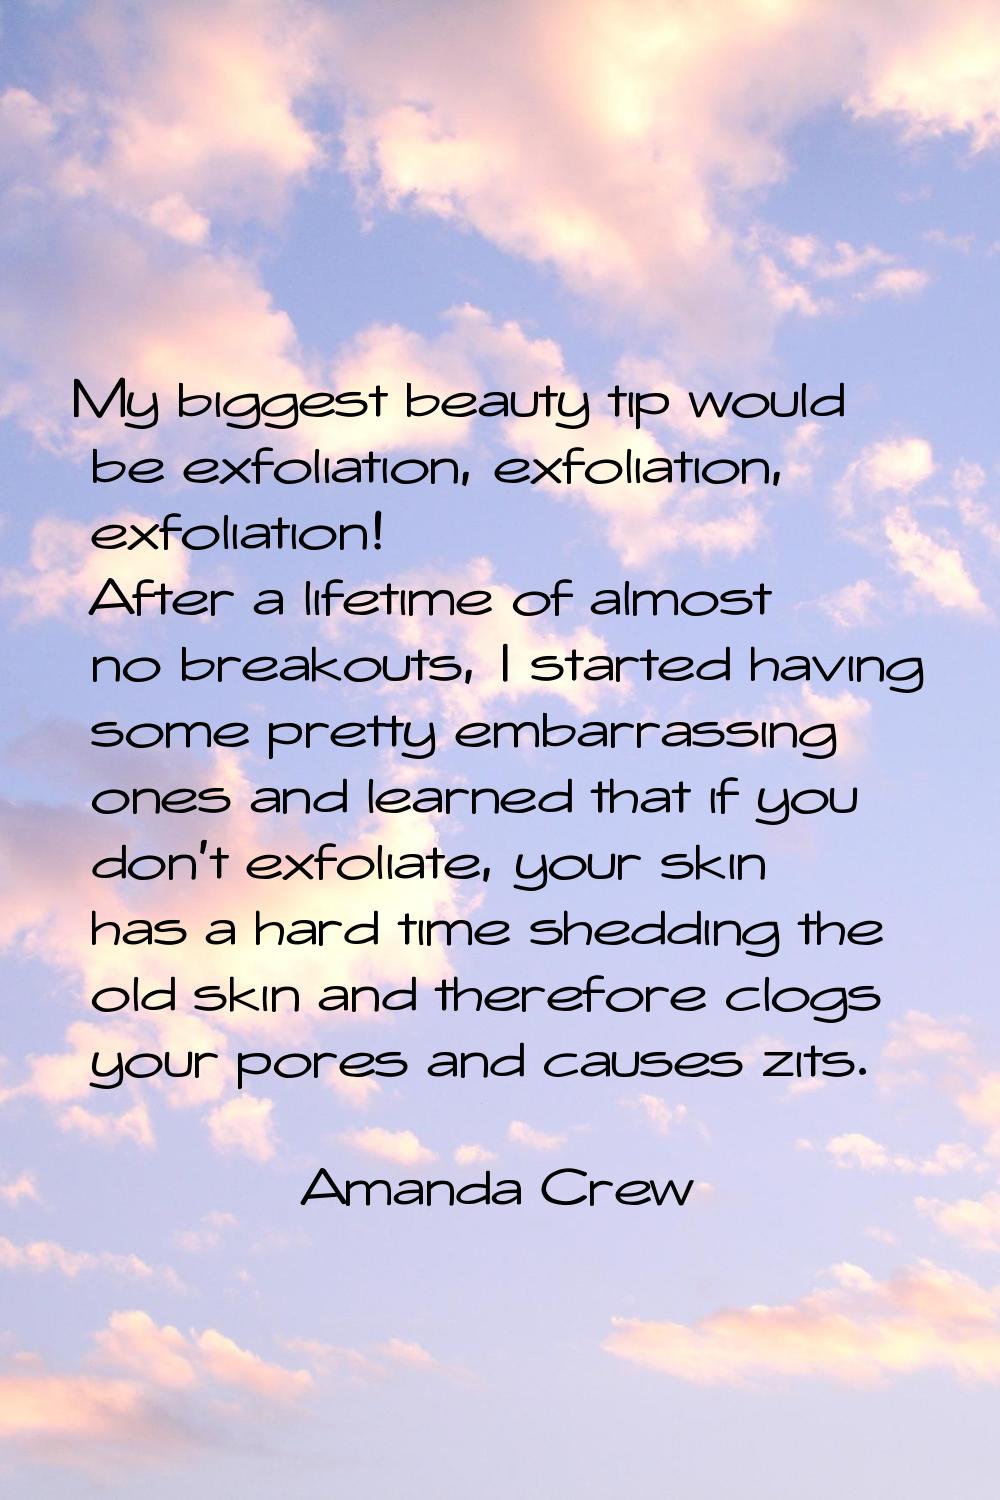 My biggest beauty tip would be exfoliation, exfoliation, exfoliation! After a lifetime of almost no